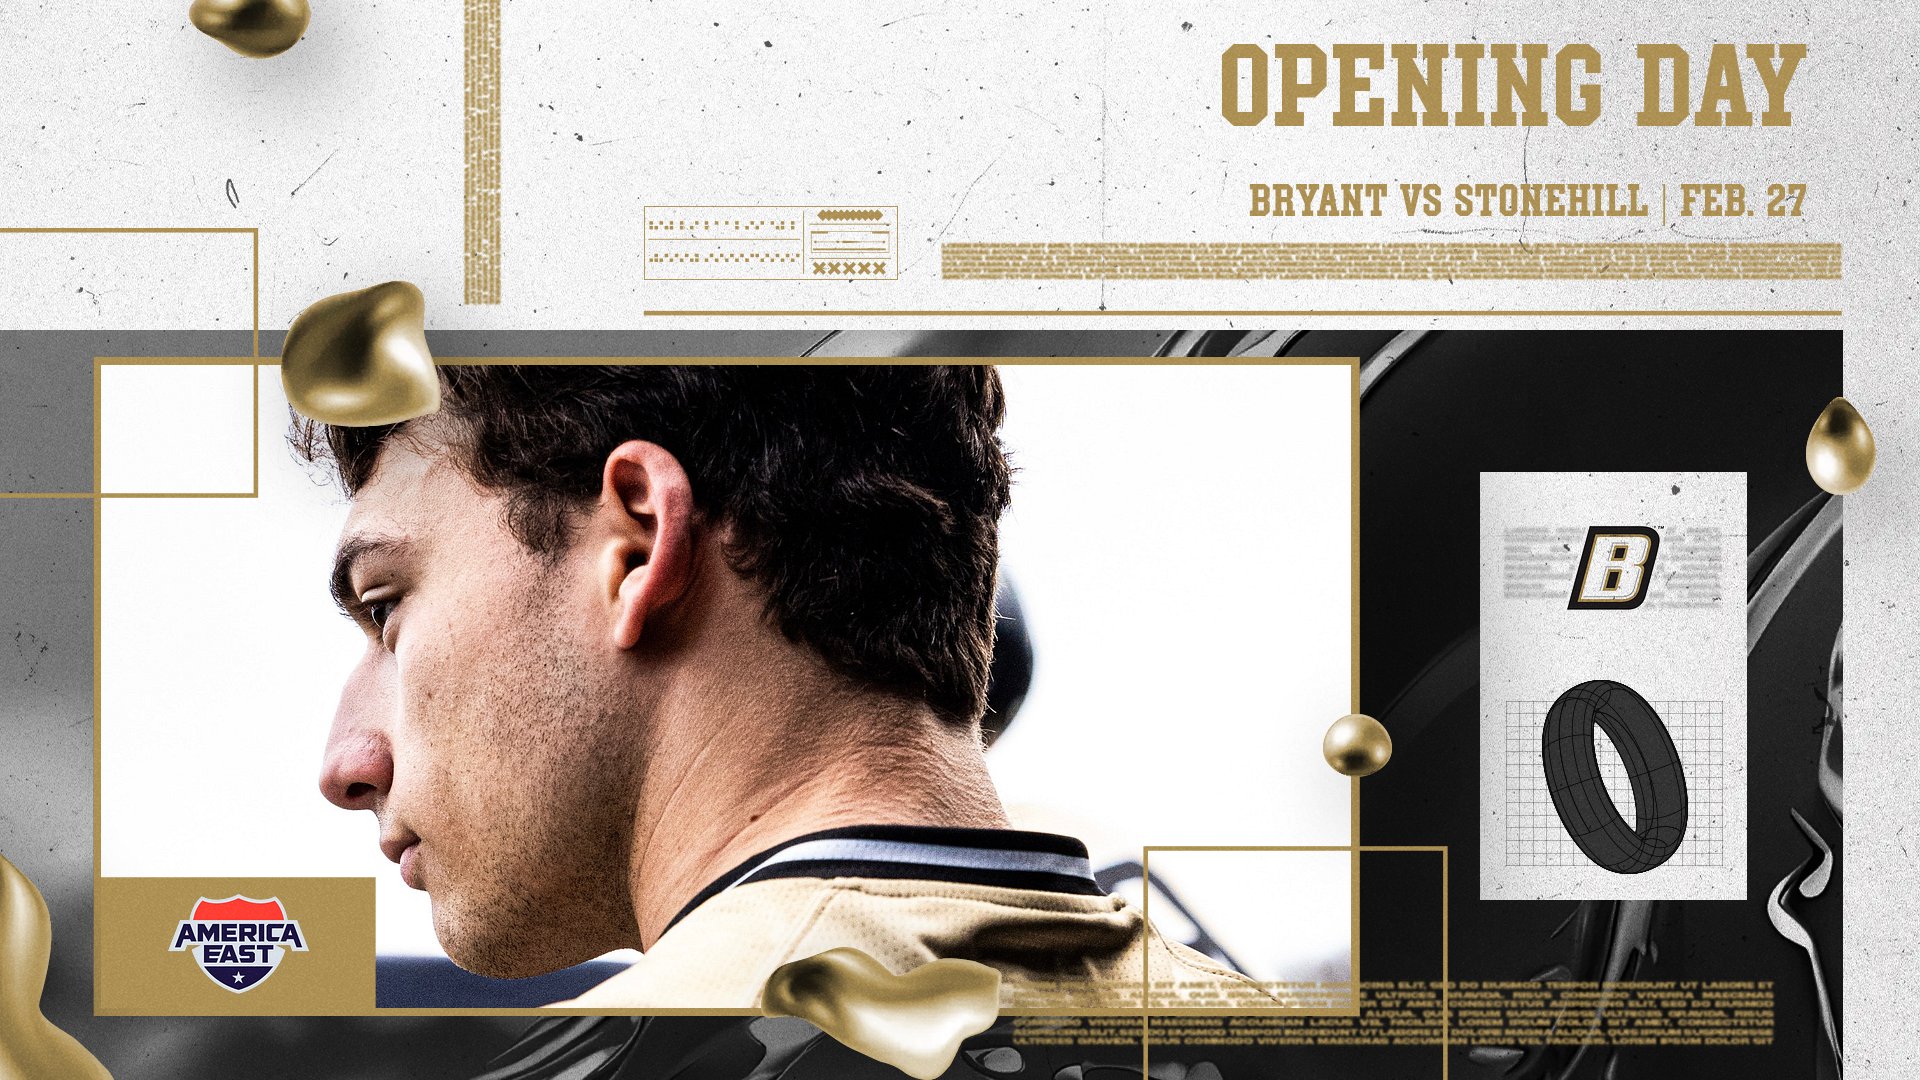 Bryant hosts Stonehill in home opener on Tuesday